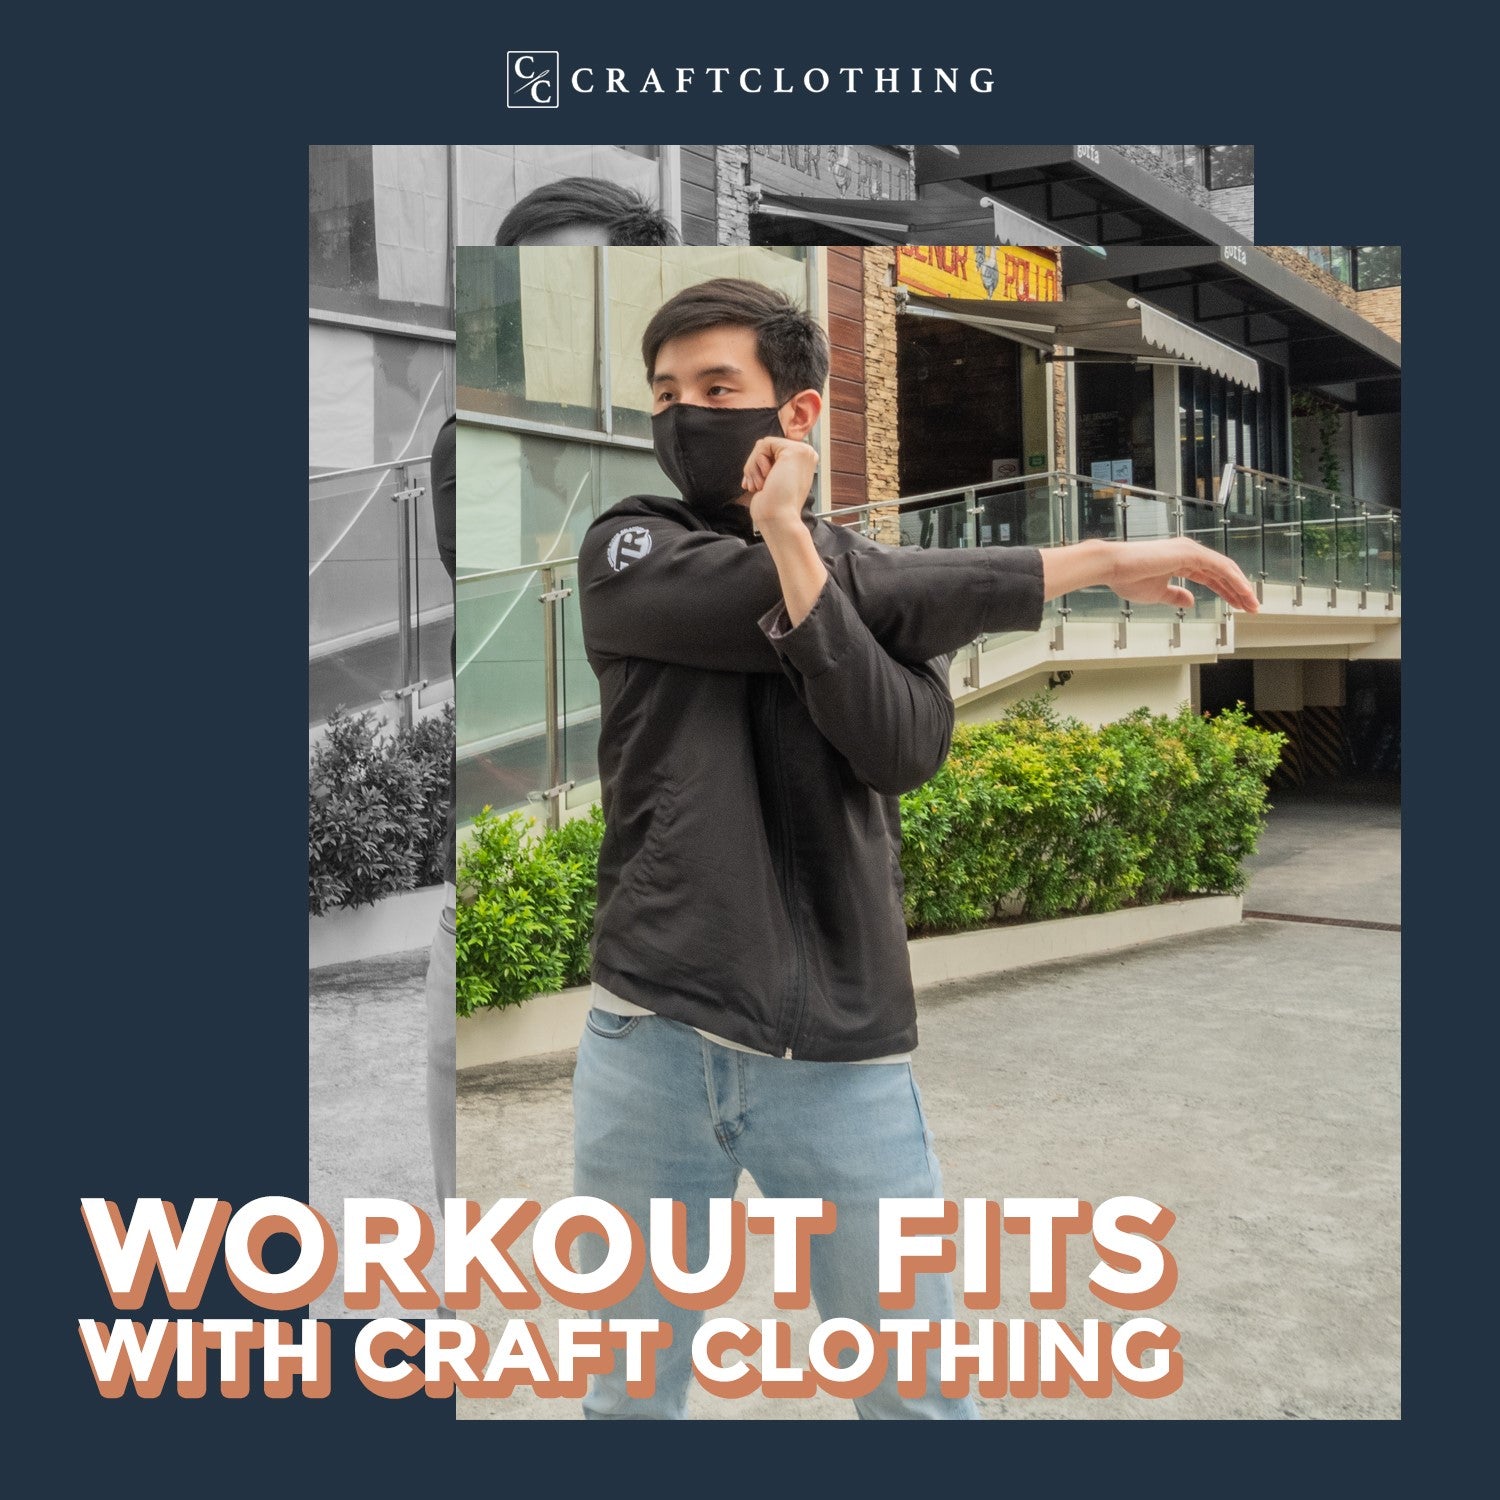 WORKOUT FITS WITH CRAFT CLOTHING